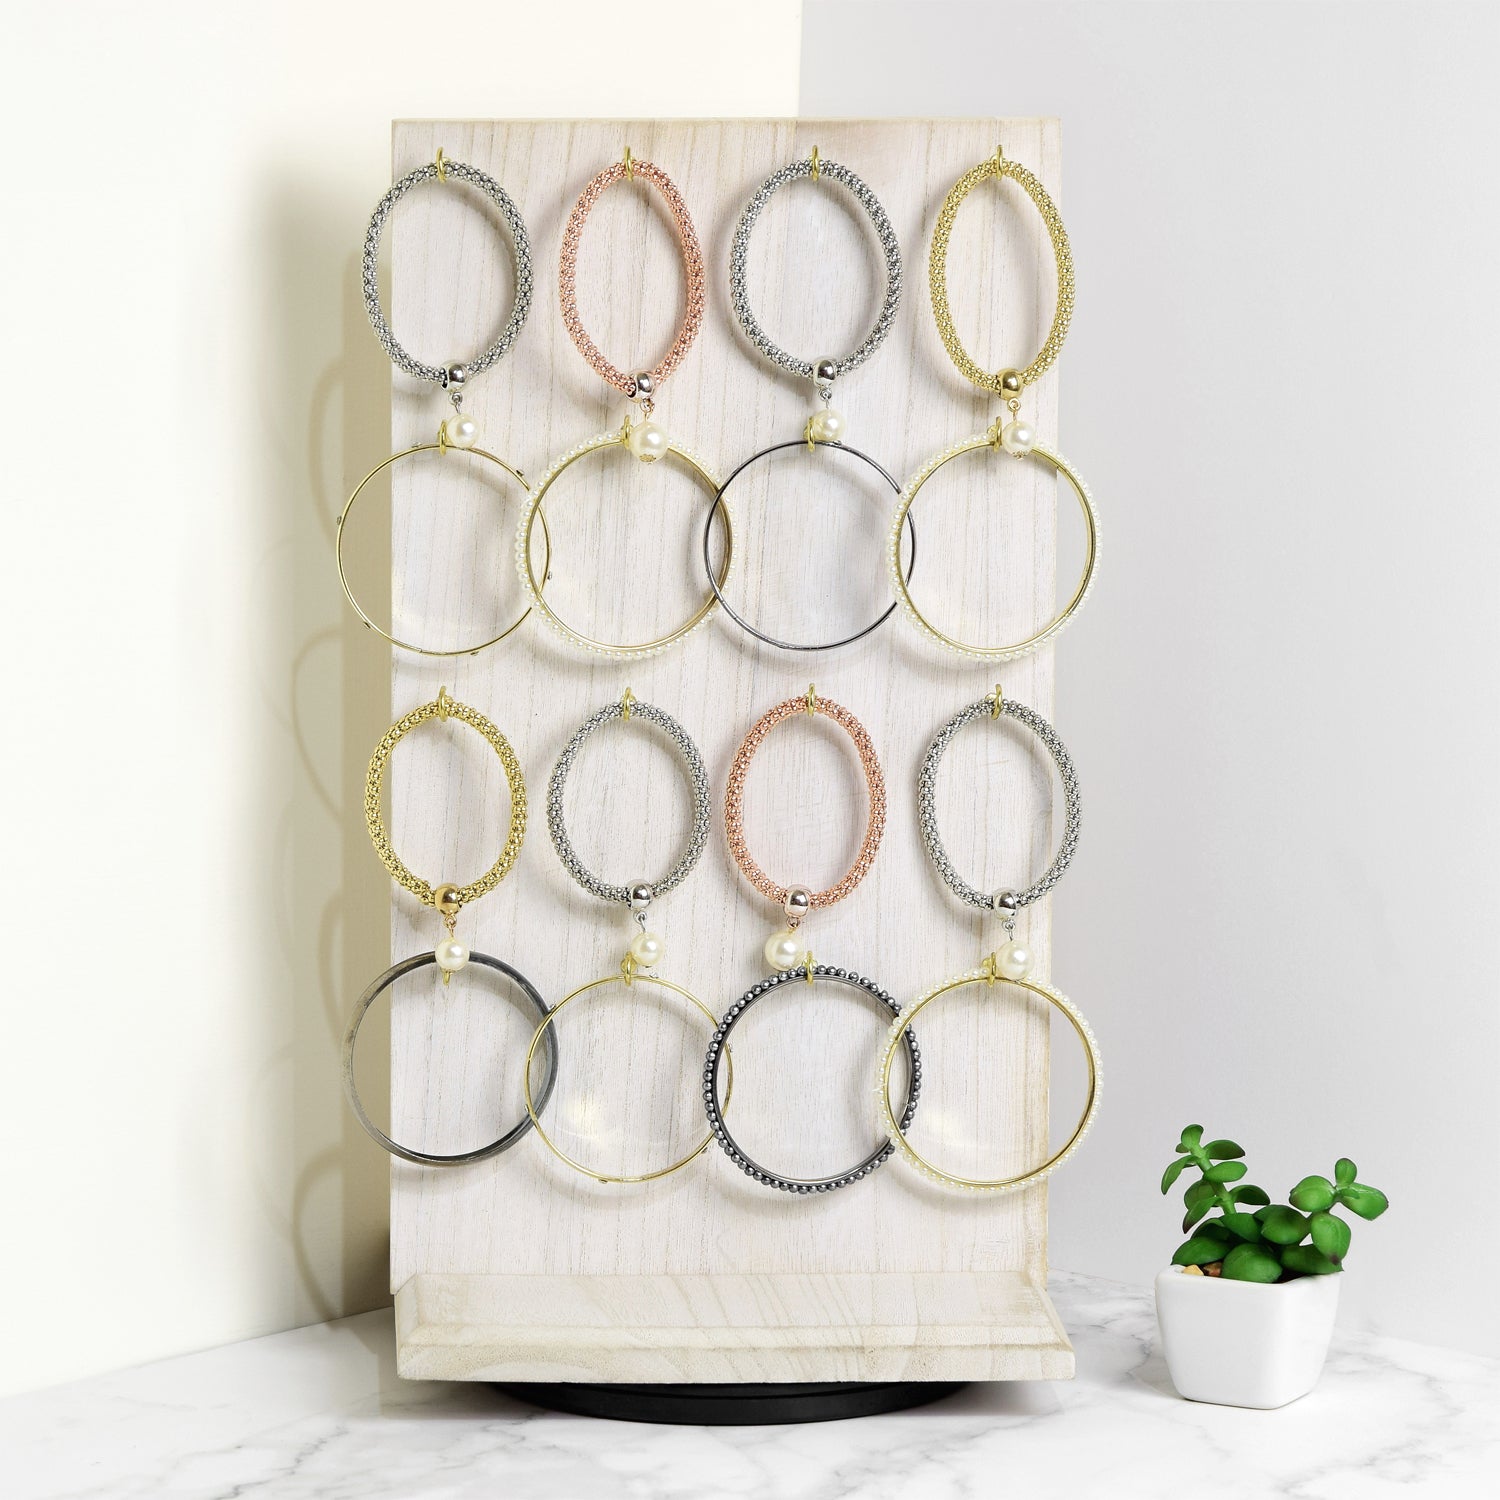 Fixturedisplays Wooden Rotating Two-Sided Jewelry Display Stand, Rotating Organizer with 32 Hooks for Store, Merchants at Shows, Earring Display with